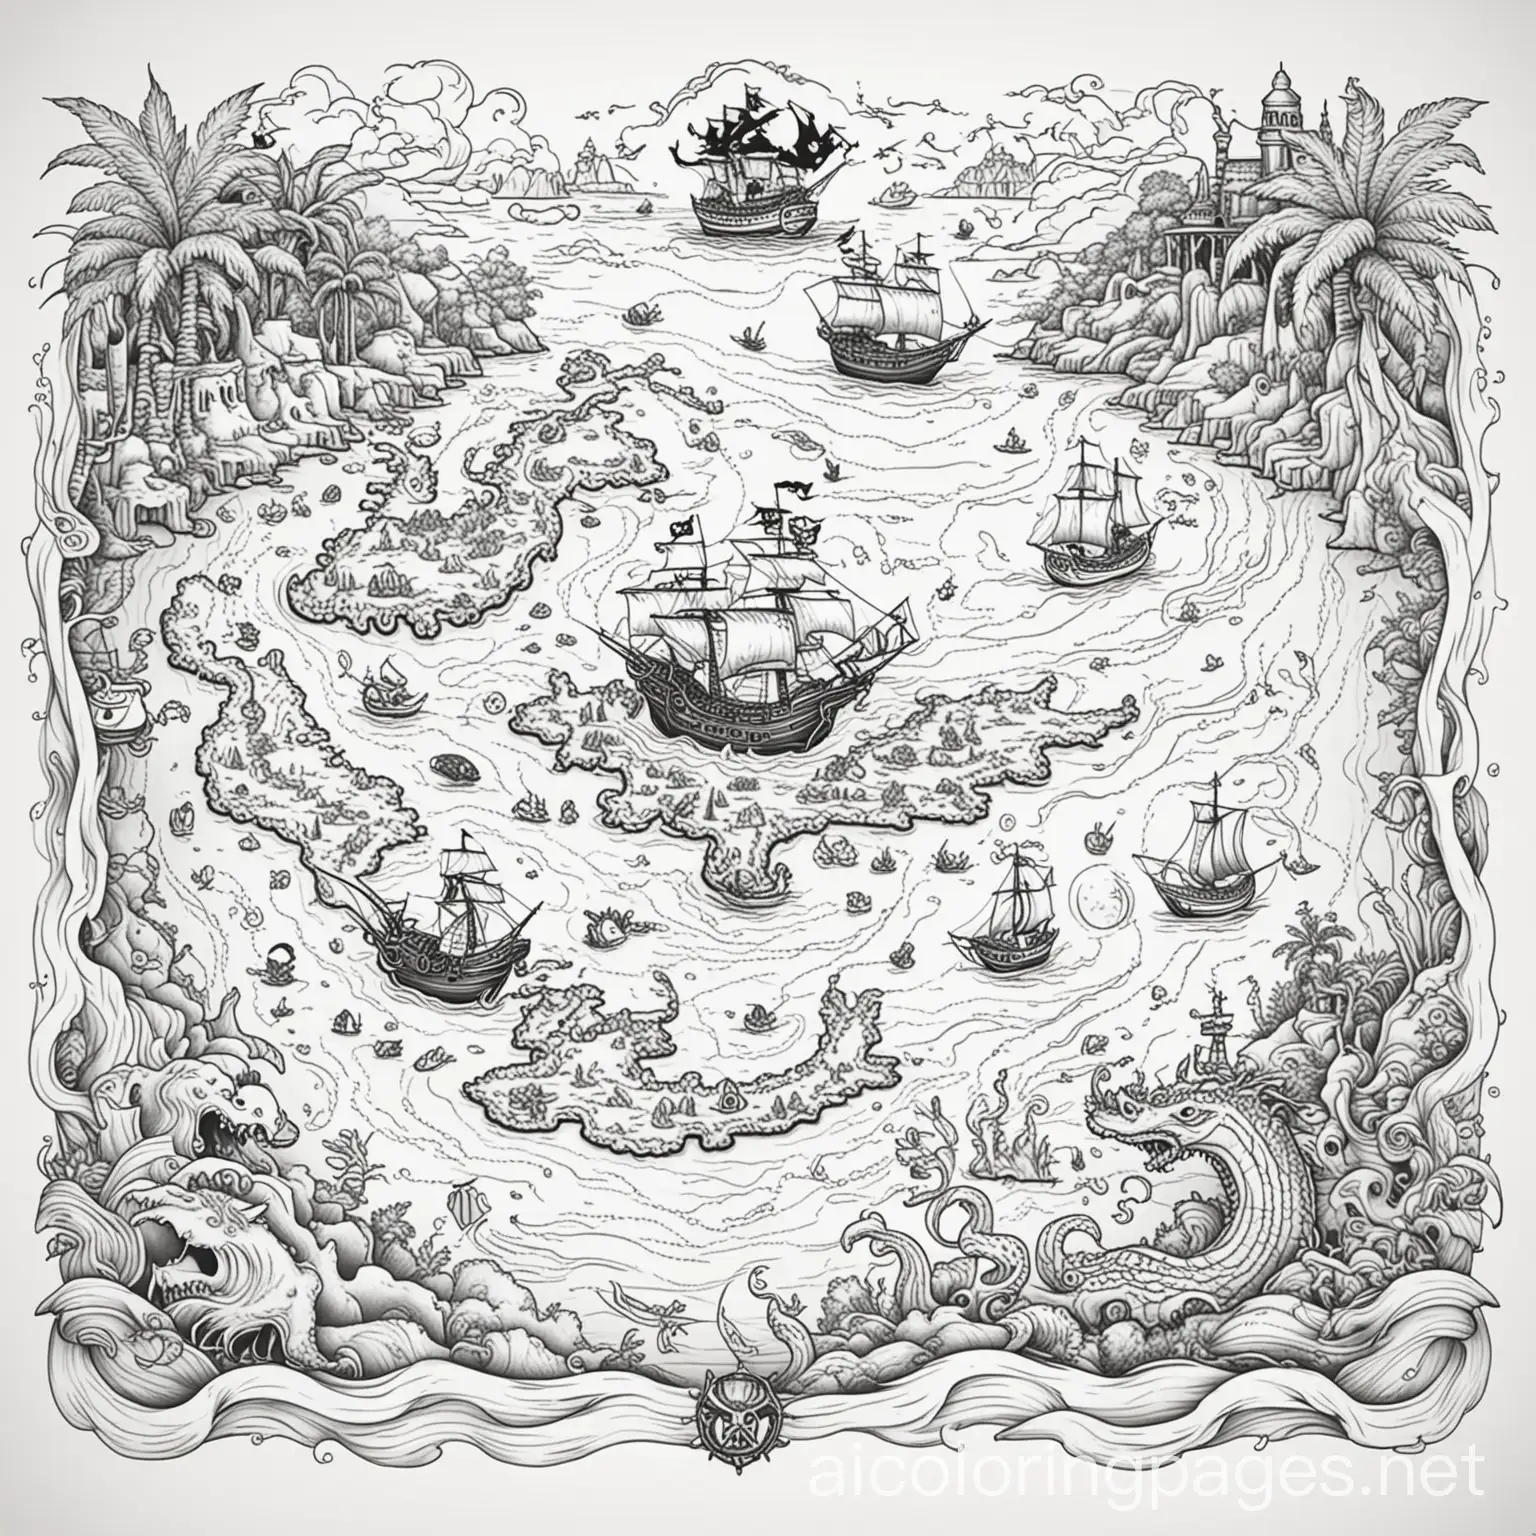 pirate map to color with a sea monster, Coloring Page, black and white, line art, white background, Simplicity, Ample White Space. The background of the coloring page is plain white to make it easy for young children to color within the lines. The outlines of all the subjects are easy to distinguish, making it simple for kids to color without too much difficulty